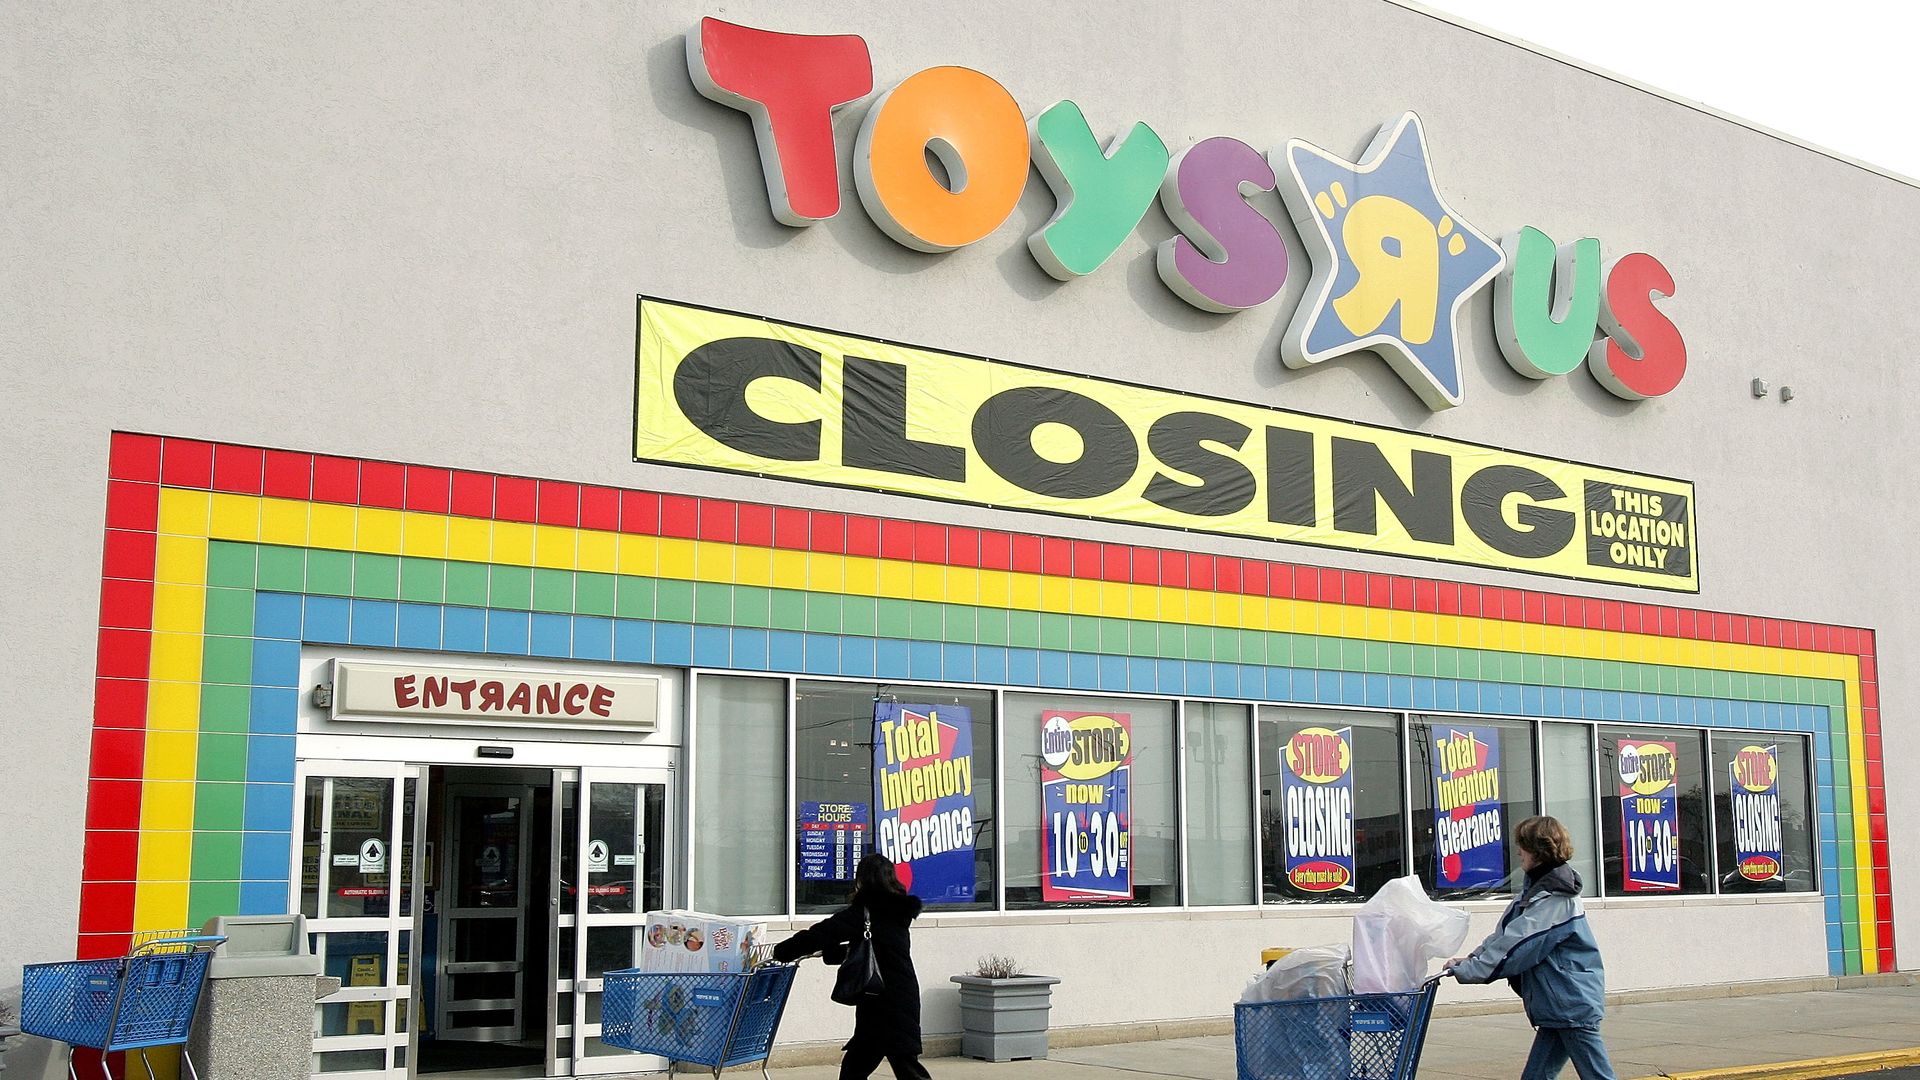 A storefront with the store name Toys R Us spelled out in giant letters in different colors above the entrance.